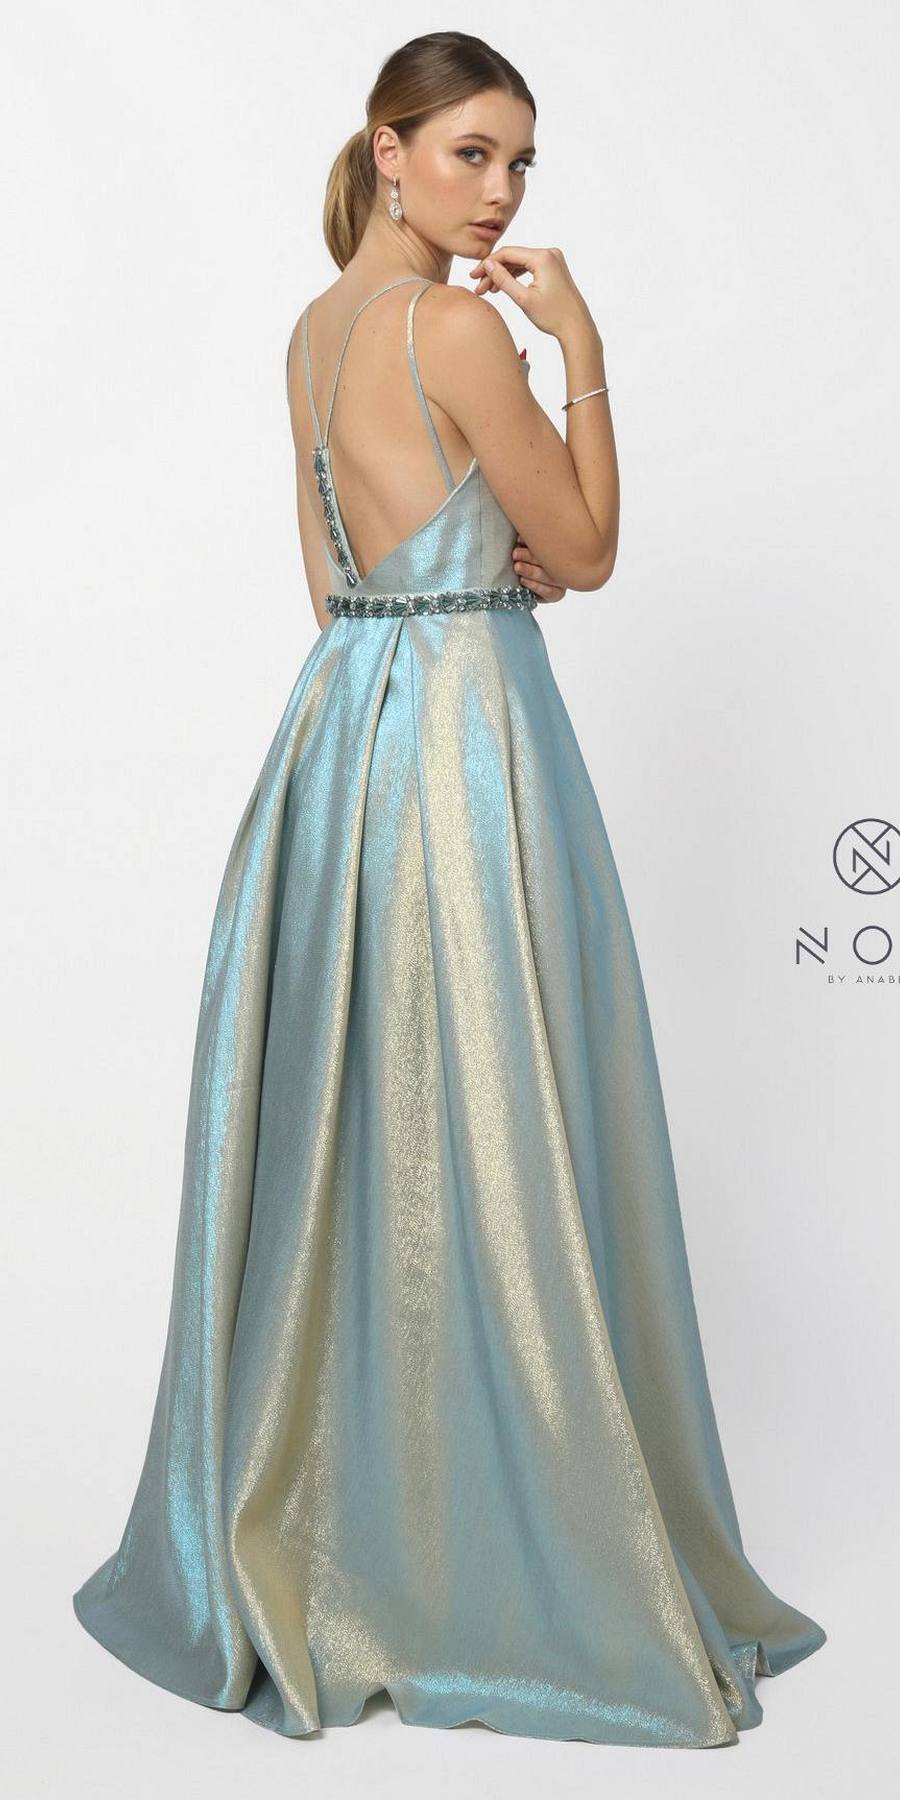 Buy MarryingHoney Glitter Metallic Gradient Prom Ball Gown Women Evening  Pageant Dresses MH5276 at Amazon.in